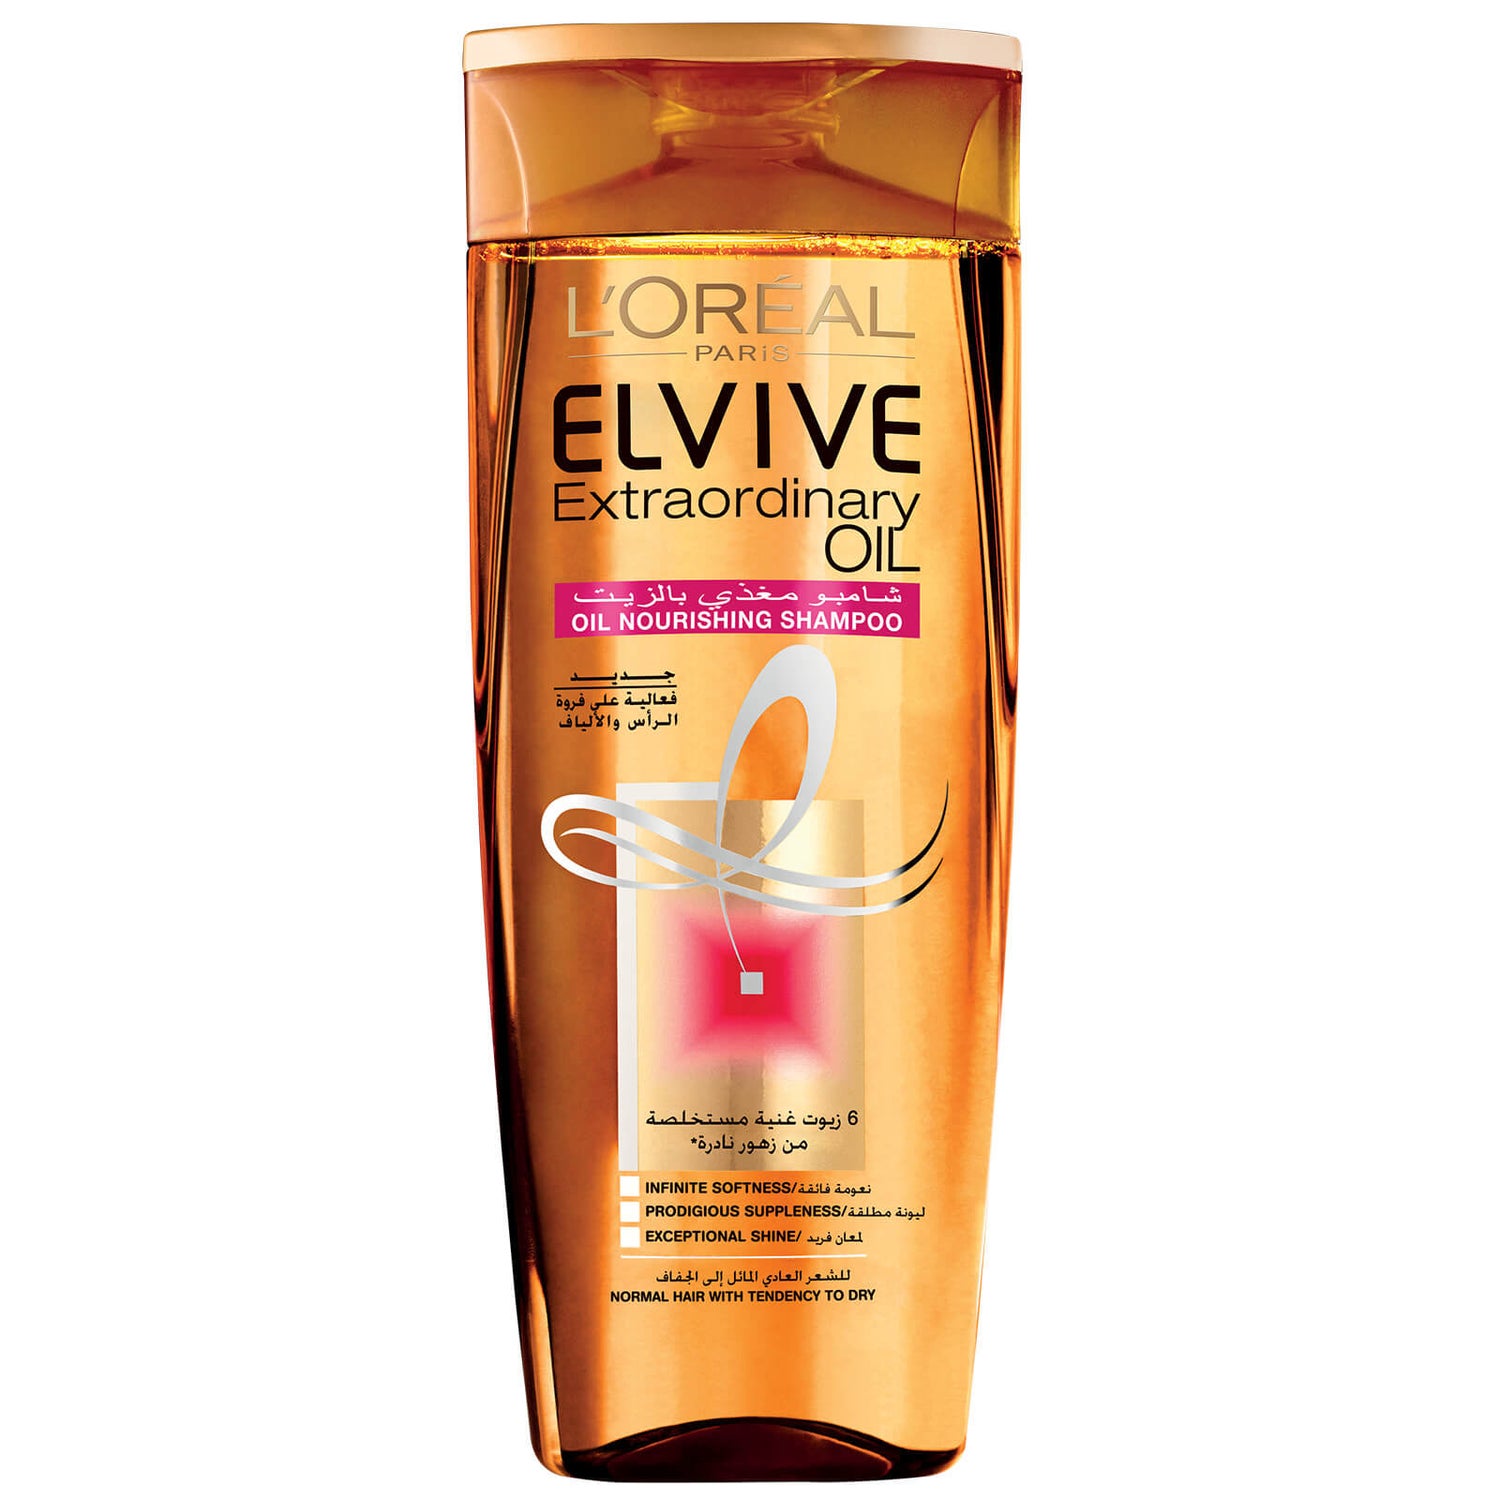 L'Oréal Paris Elvive Extraordinary Oil Shampoo for Normal to Dry Hair (Various Sizes)